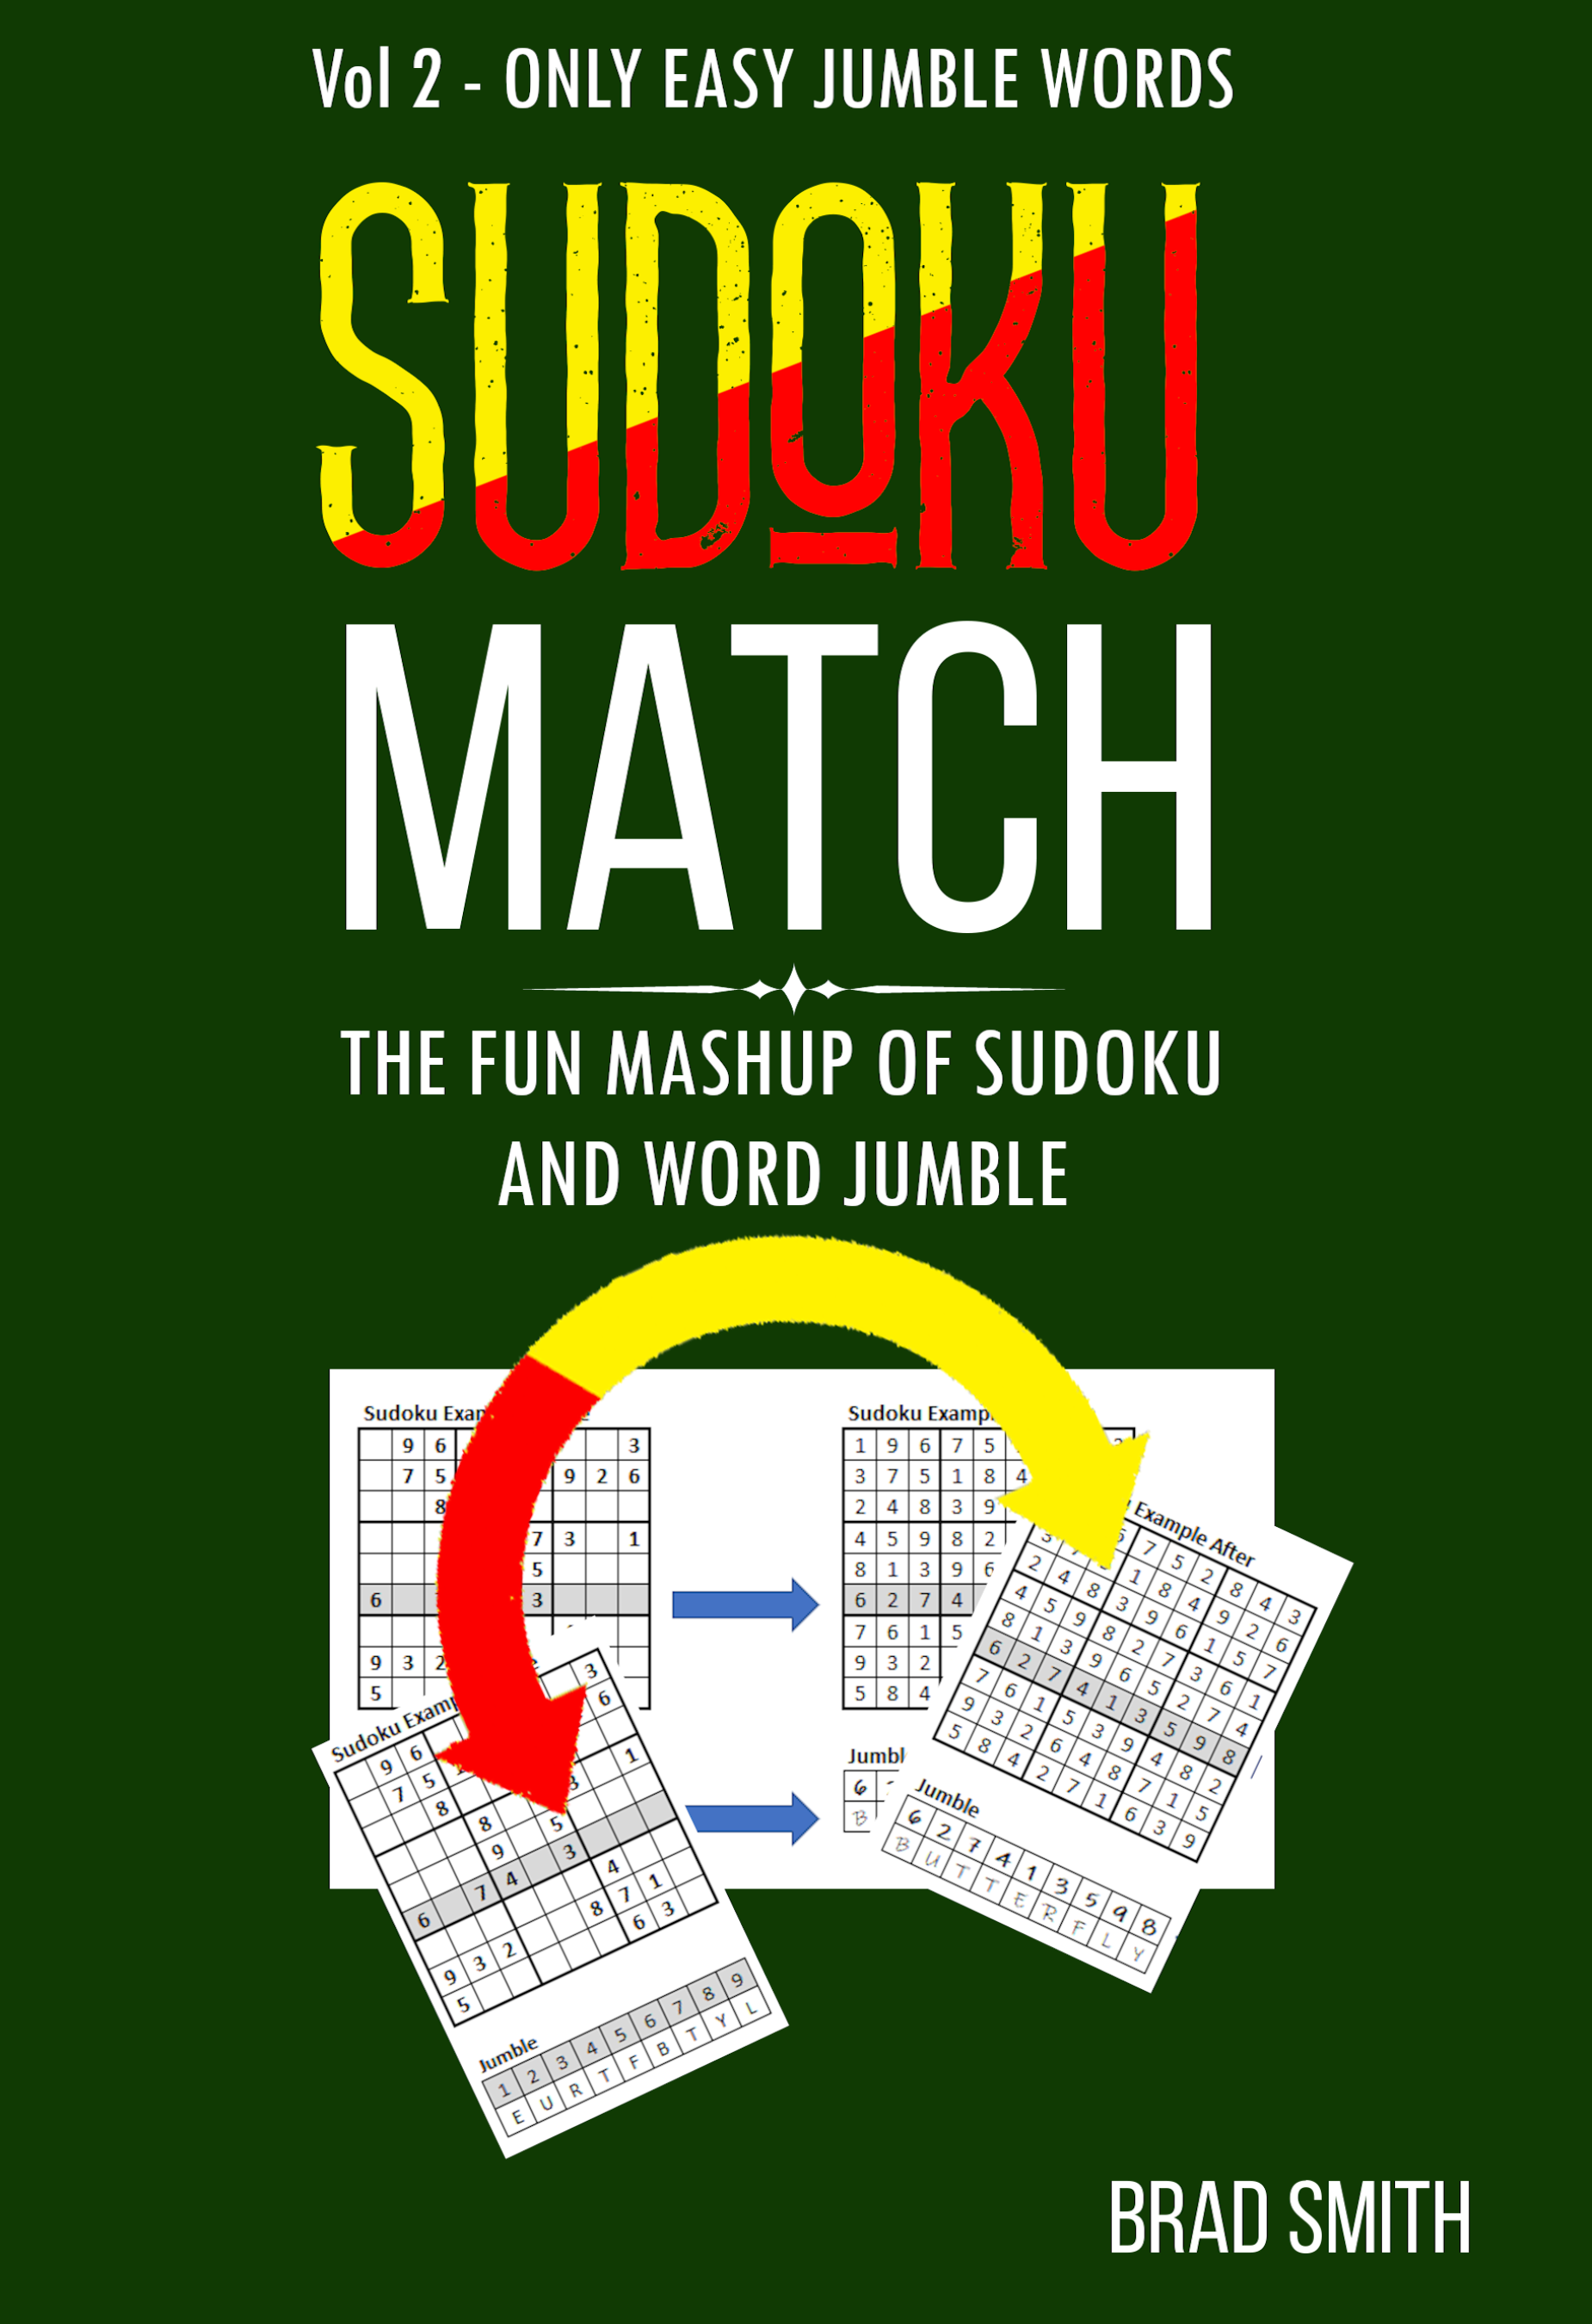 Sukudo match and word jumble-vol 2 - FRONT COVER ONLY